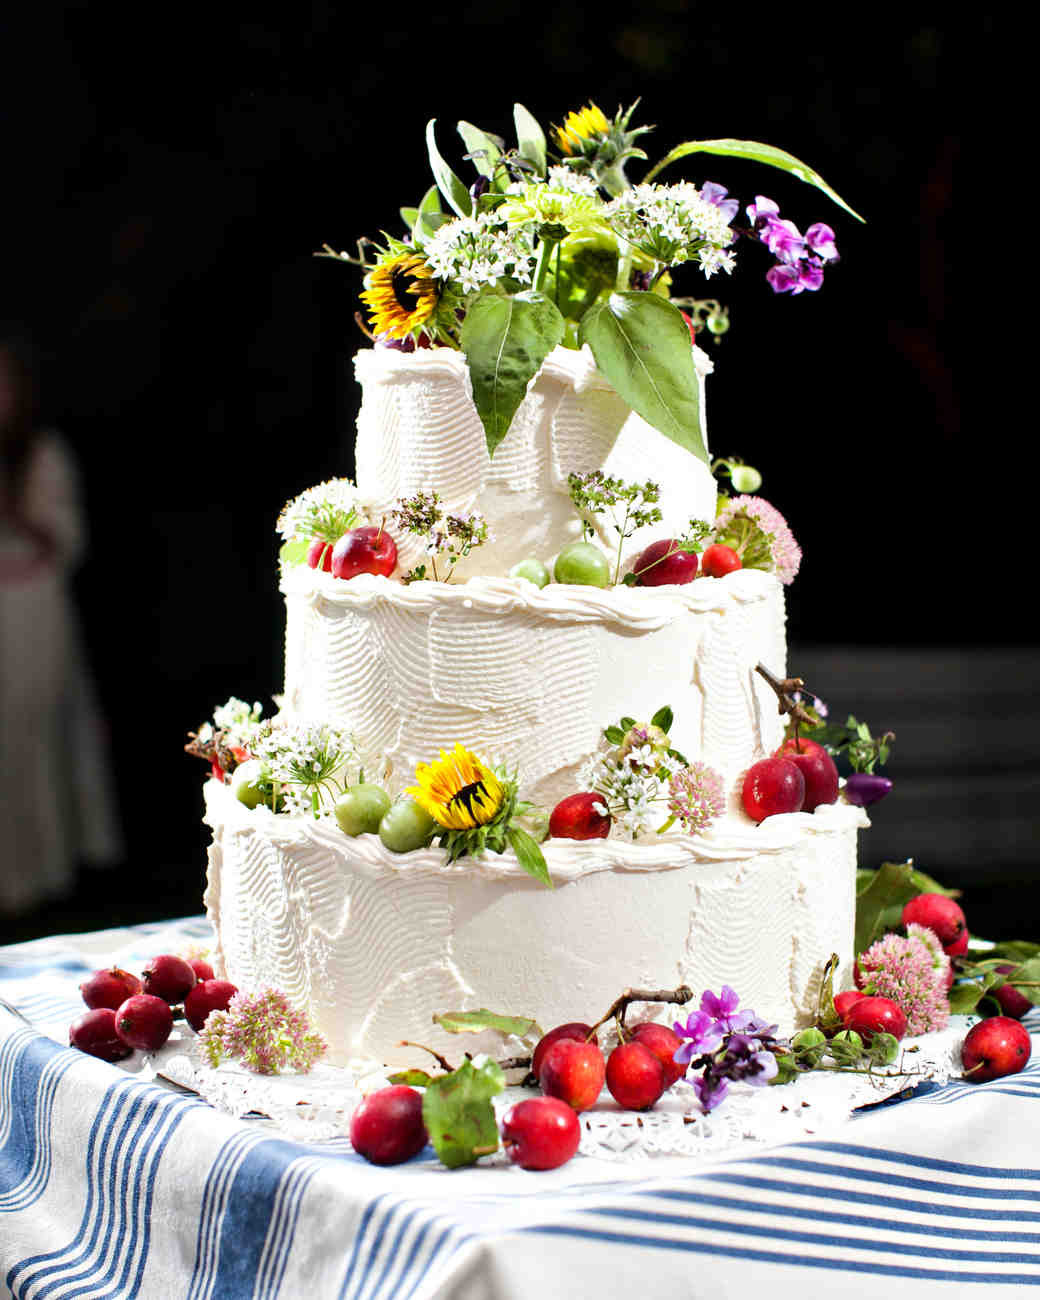 Amazing Wedding Cakes
 32 Amazing Wedding Cakes You Have to See to Believe